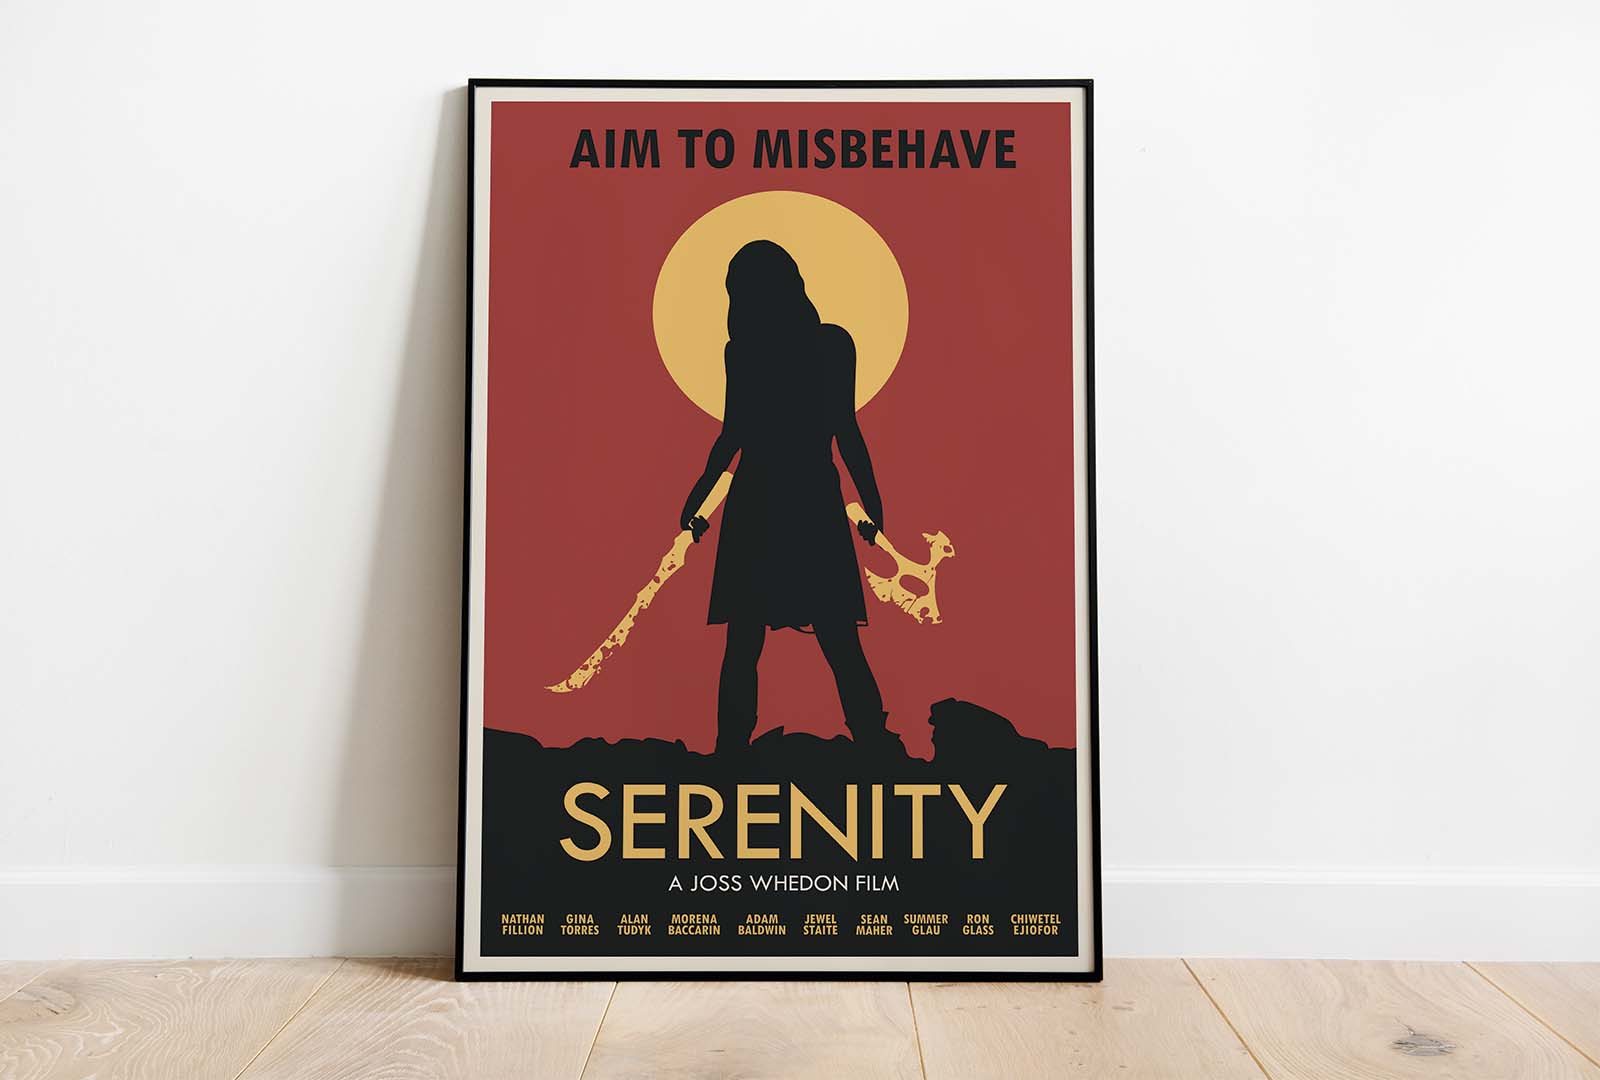  / “Serenity”; Roadshow Movie Poster, 27 x 40 inches print advertisement, 2020. Movie poster in the “roadshow” style, advertising the movie ‘Serenity’ (2005) based on the sci-fi TV show ‘Firefly’ (2002). 
